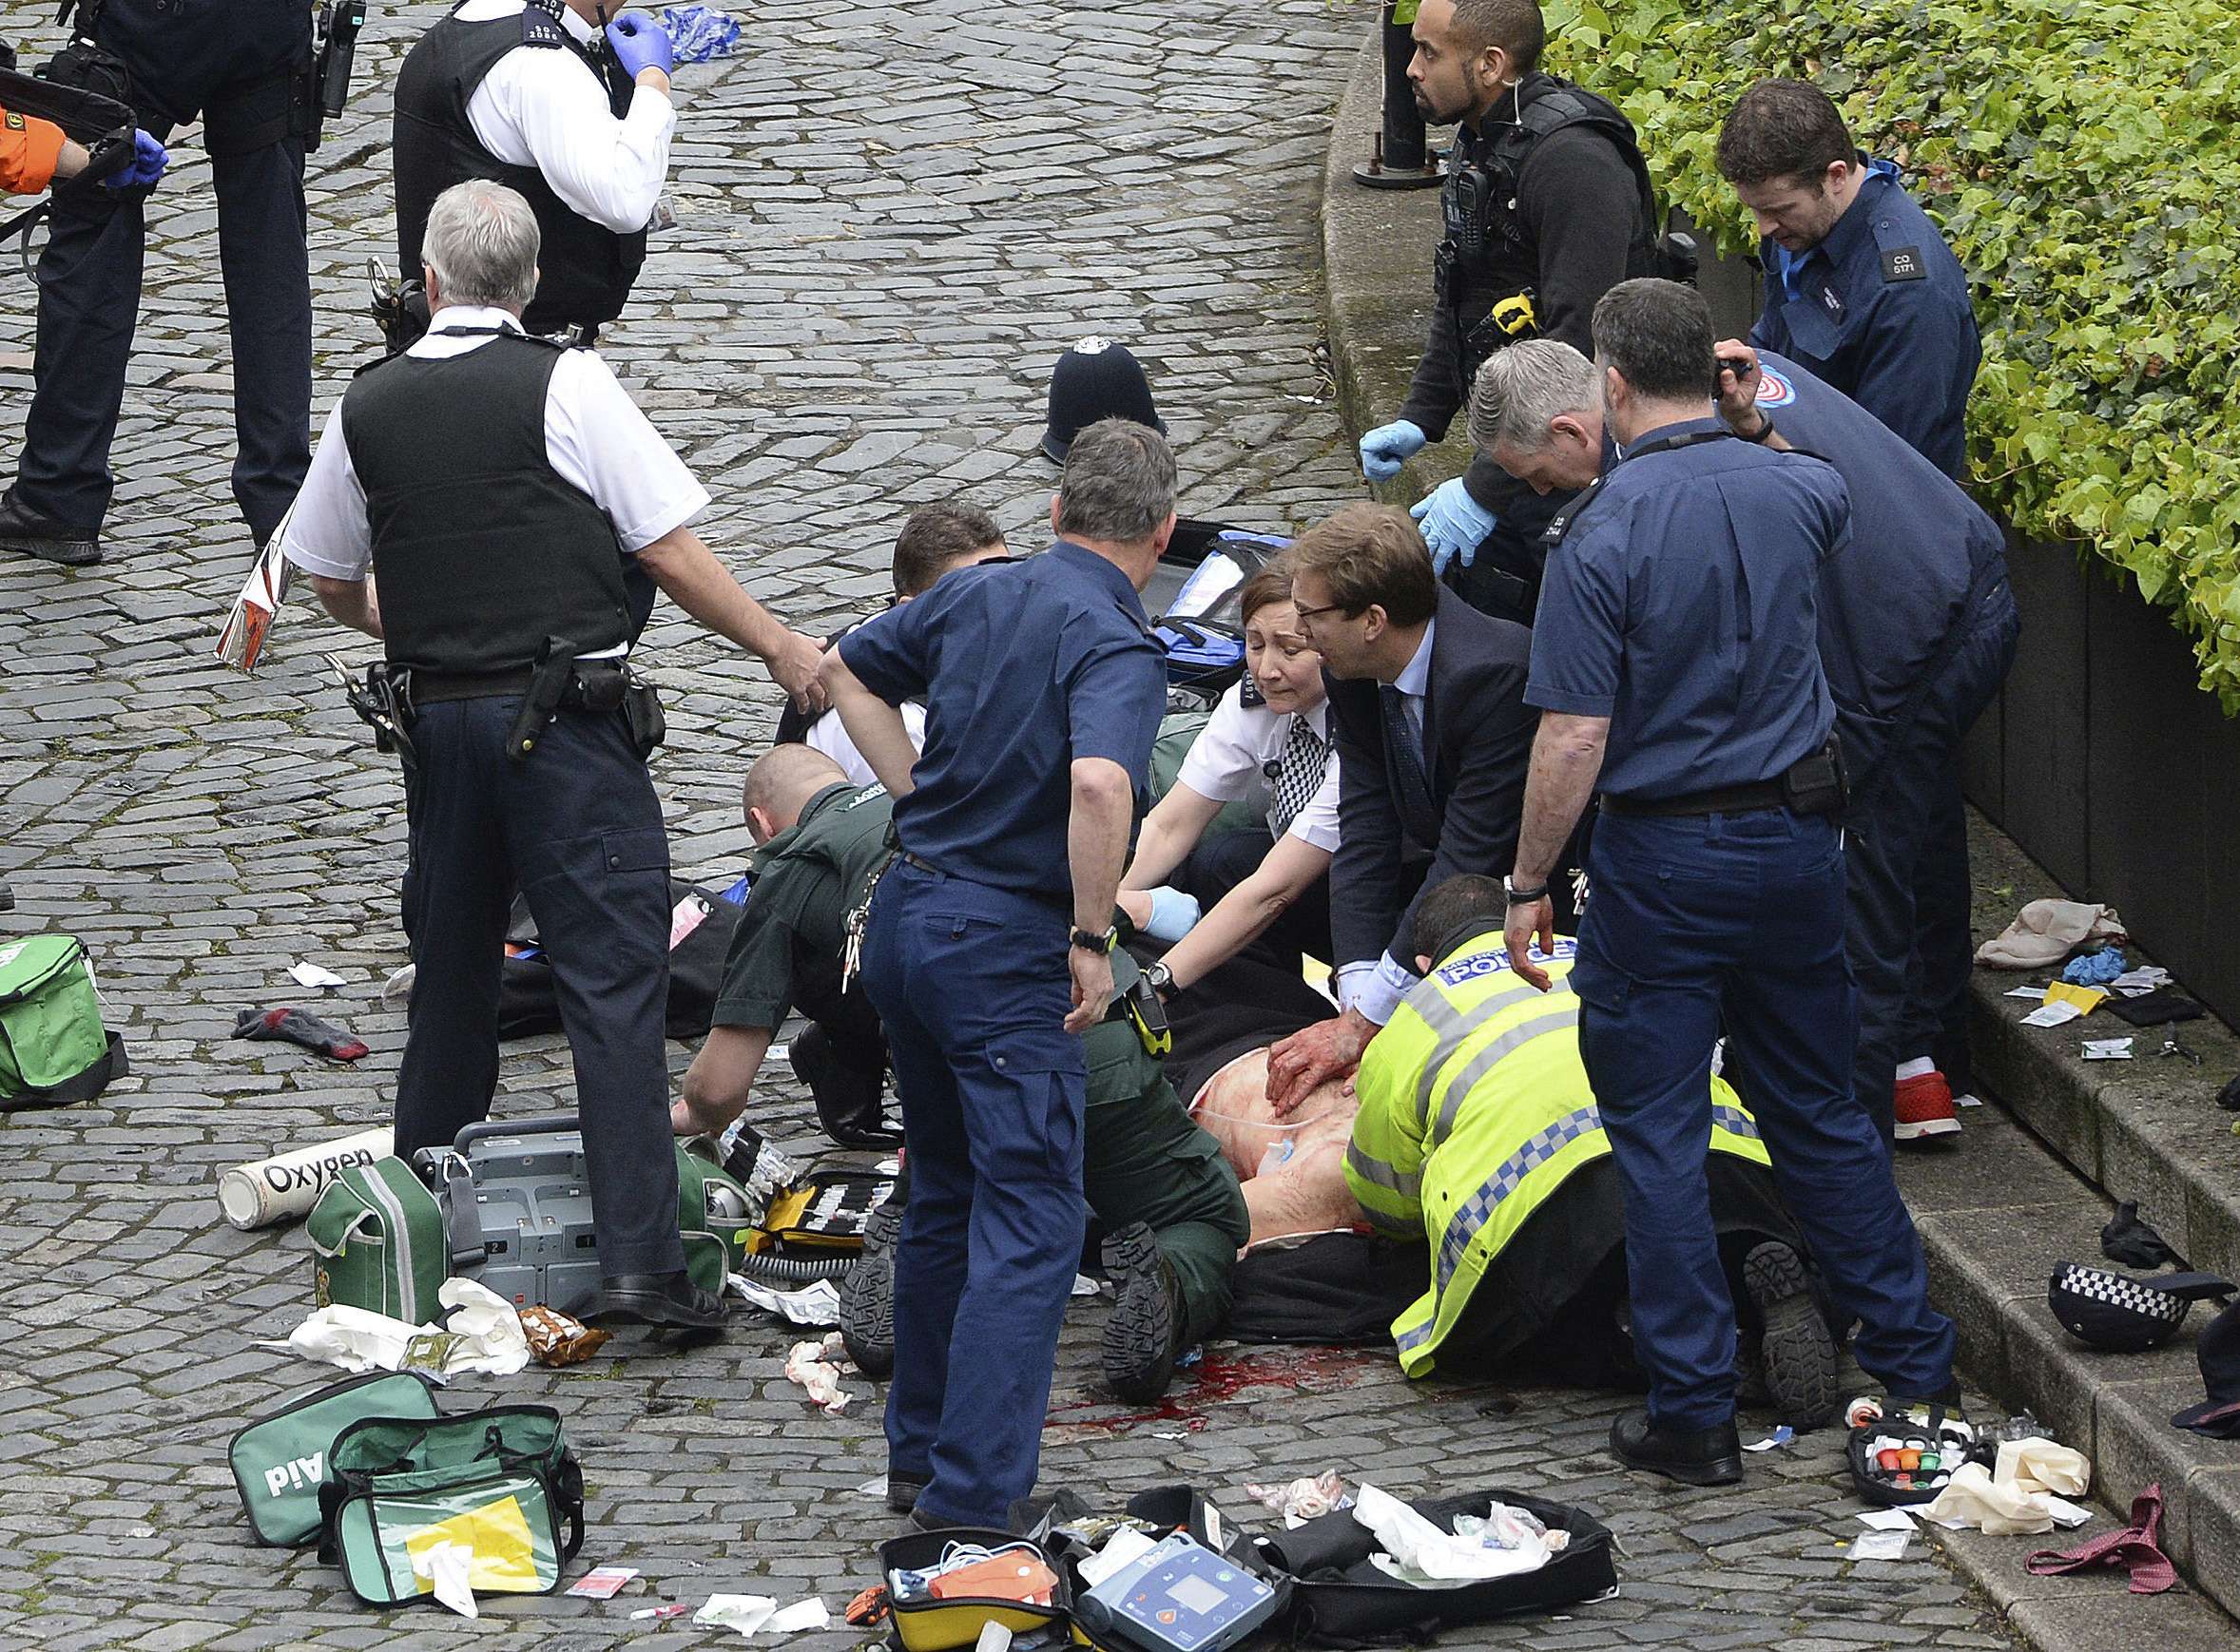 Conservative Member of Parliament Tobias Ellwood (centre, in suit) prvides first aid to police officer Keith Palmer, who was stabbed in the terrist attack outside the UK parliament in London. Palmer did not survive. Photo: AP